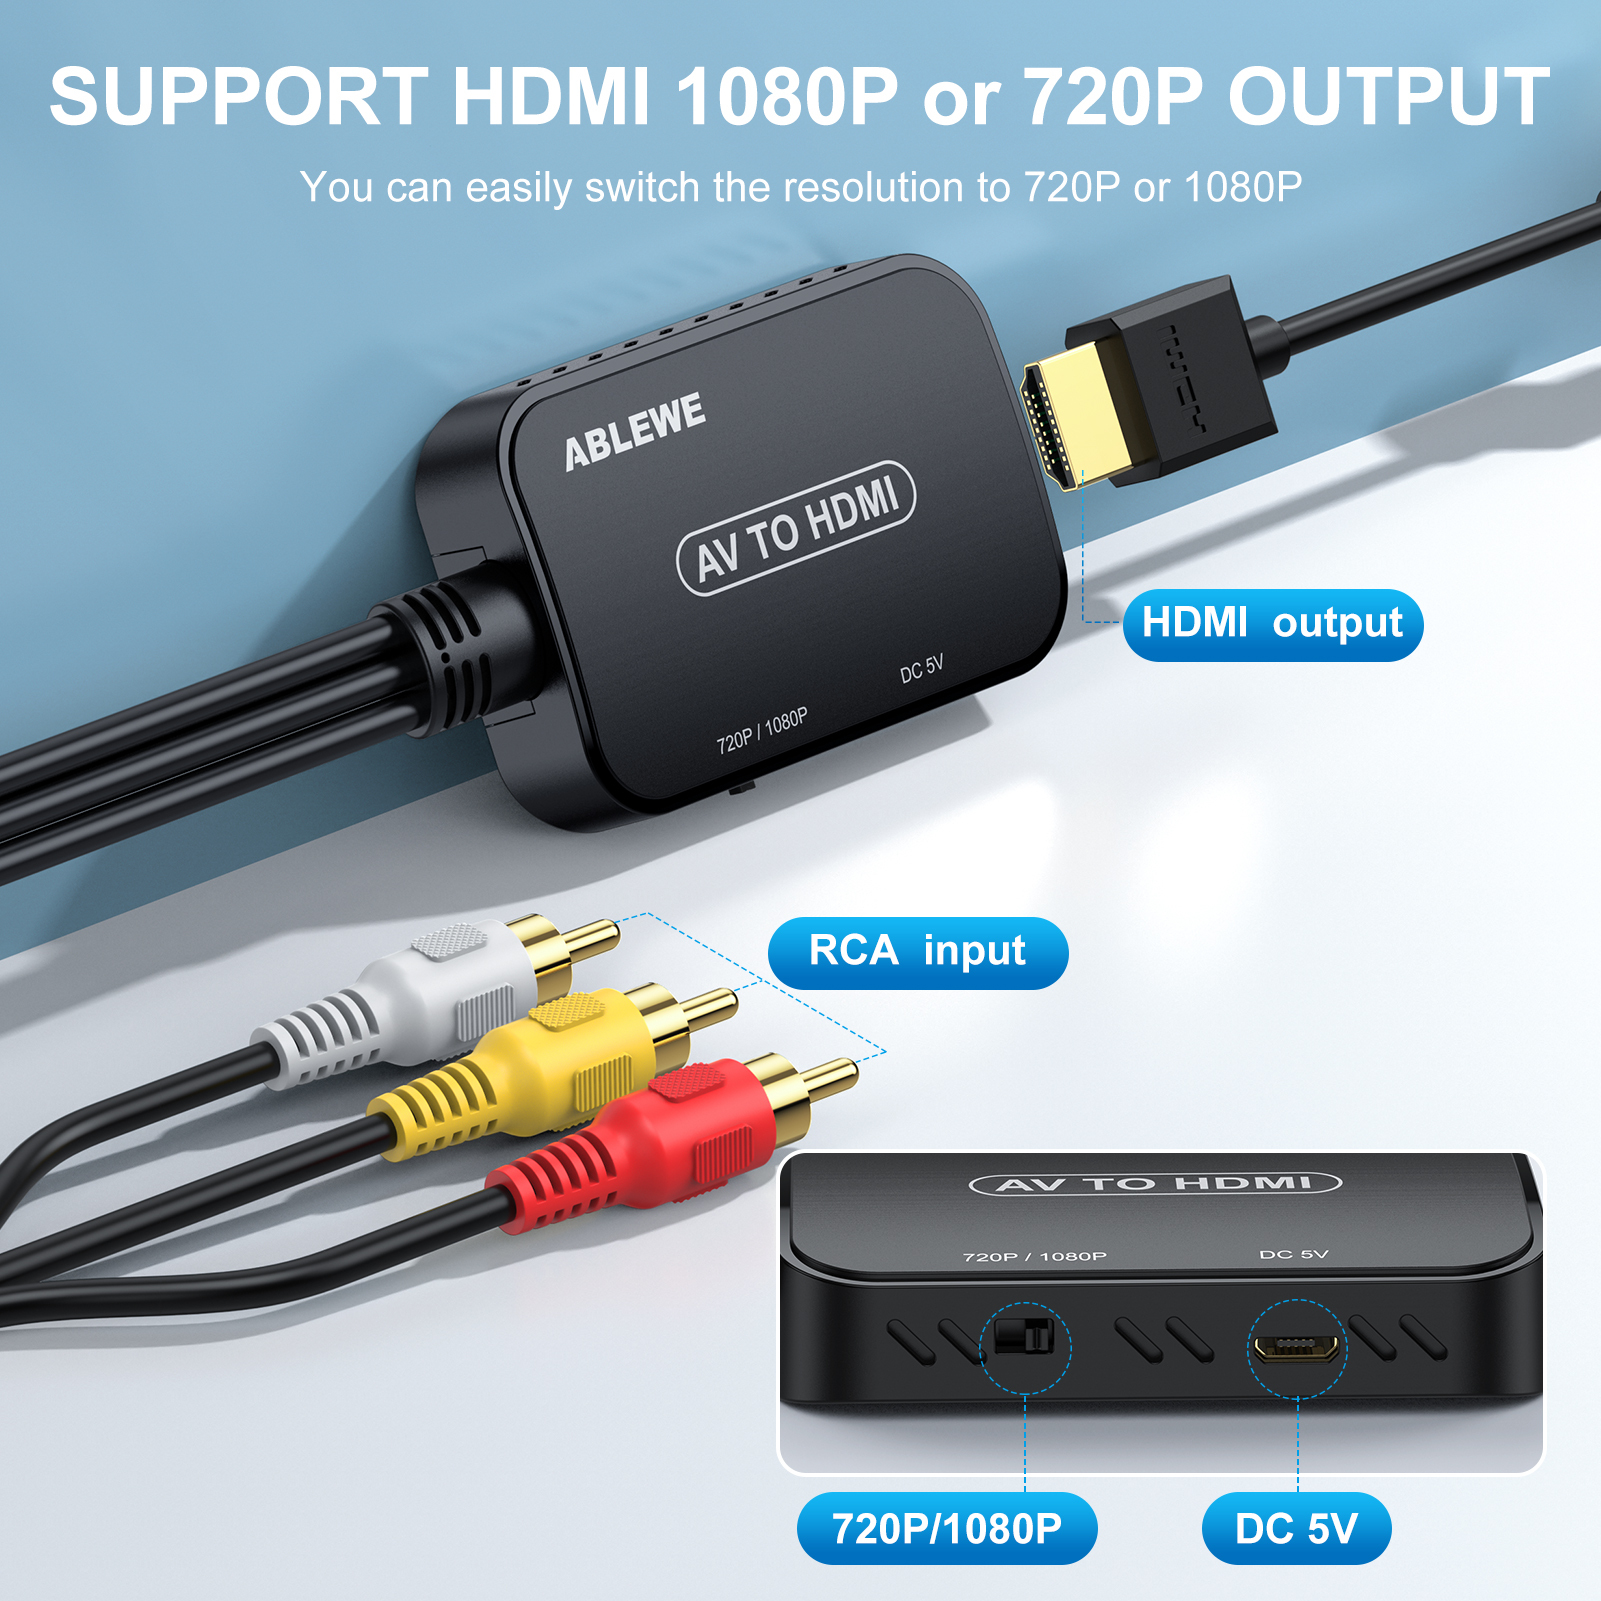 to HDMI Composite to HDMI Adapter with RCA & HDMI Cable Supporting PAL/NTSC for TV/PC/PS3/WII/XBOX/N64/VHS/VCR/Blue-ray DVD Players